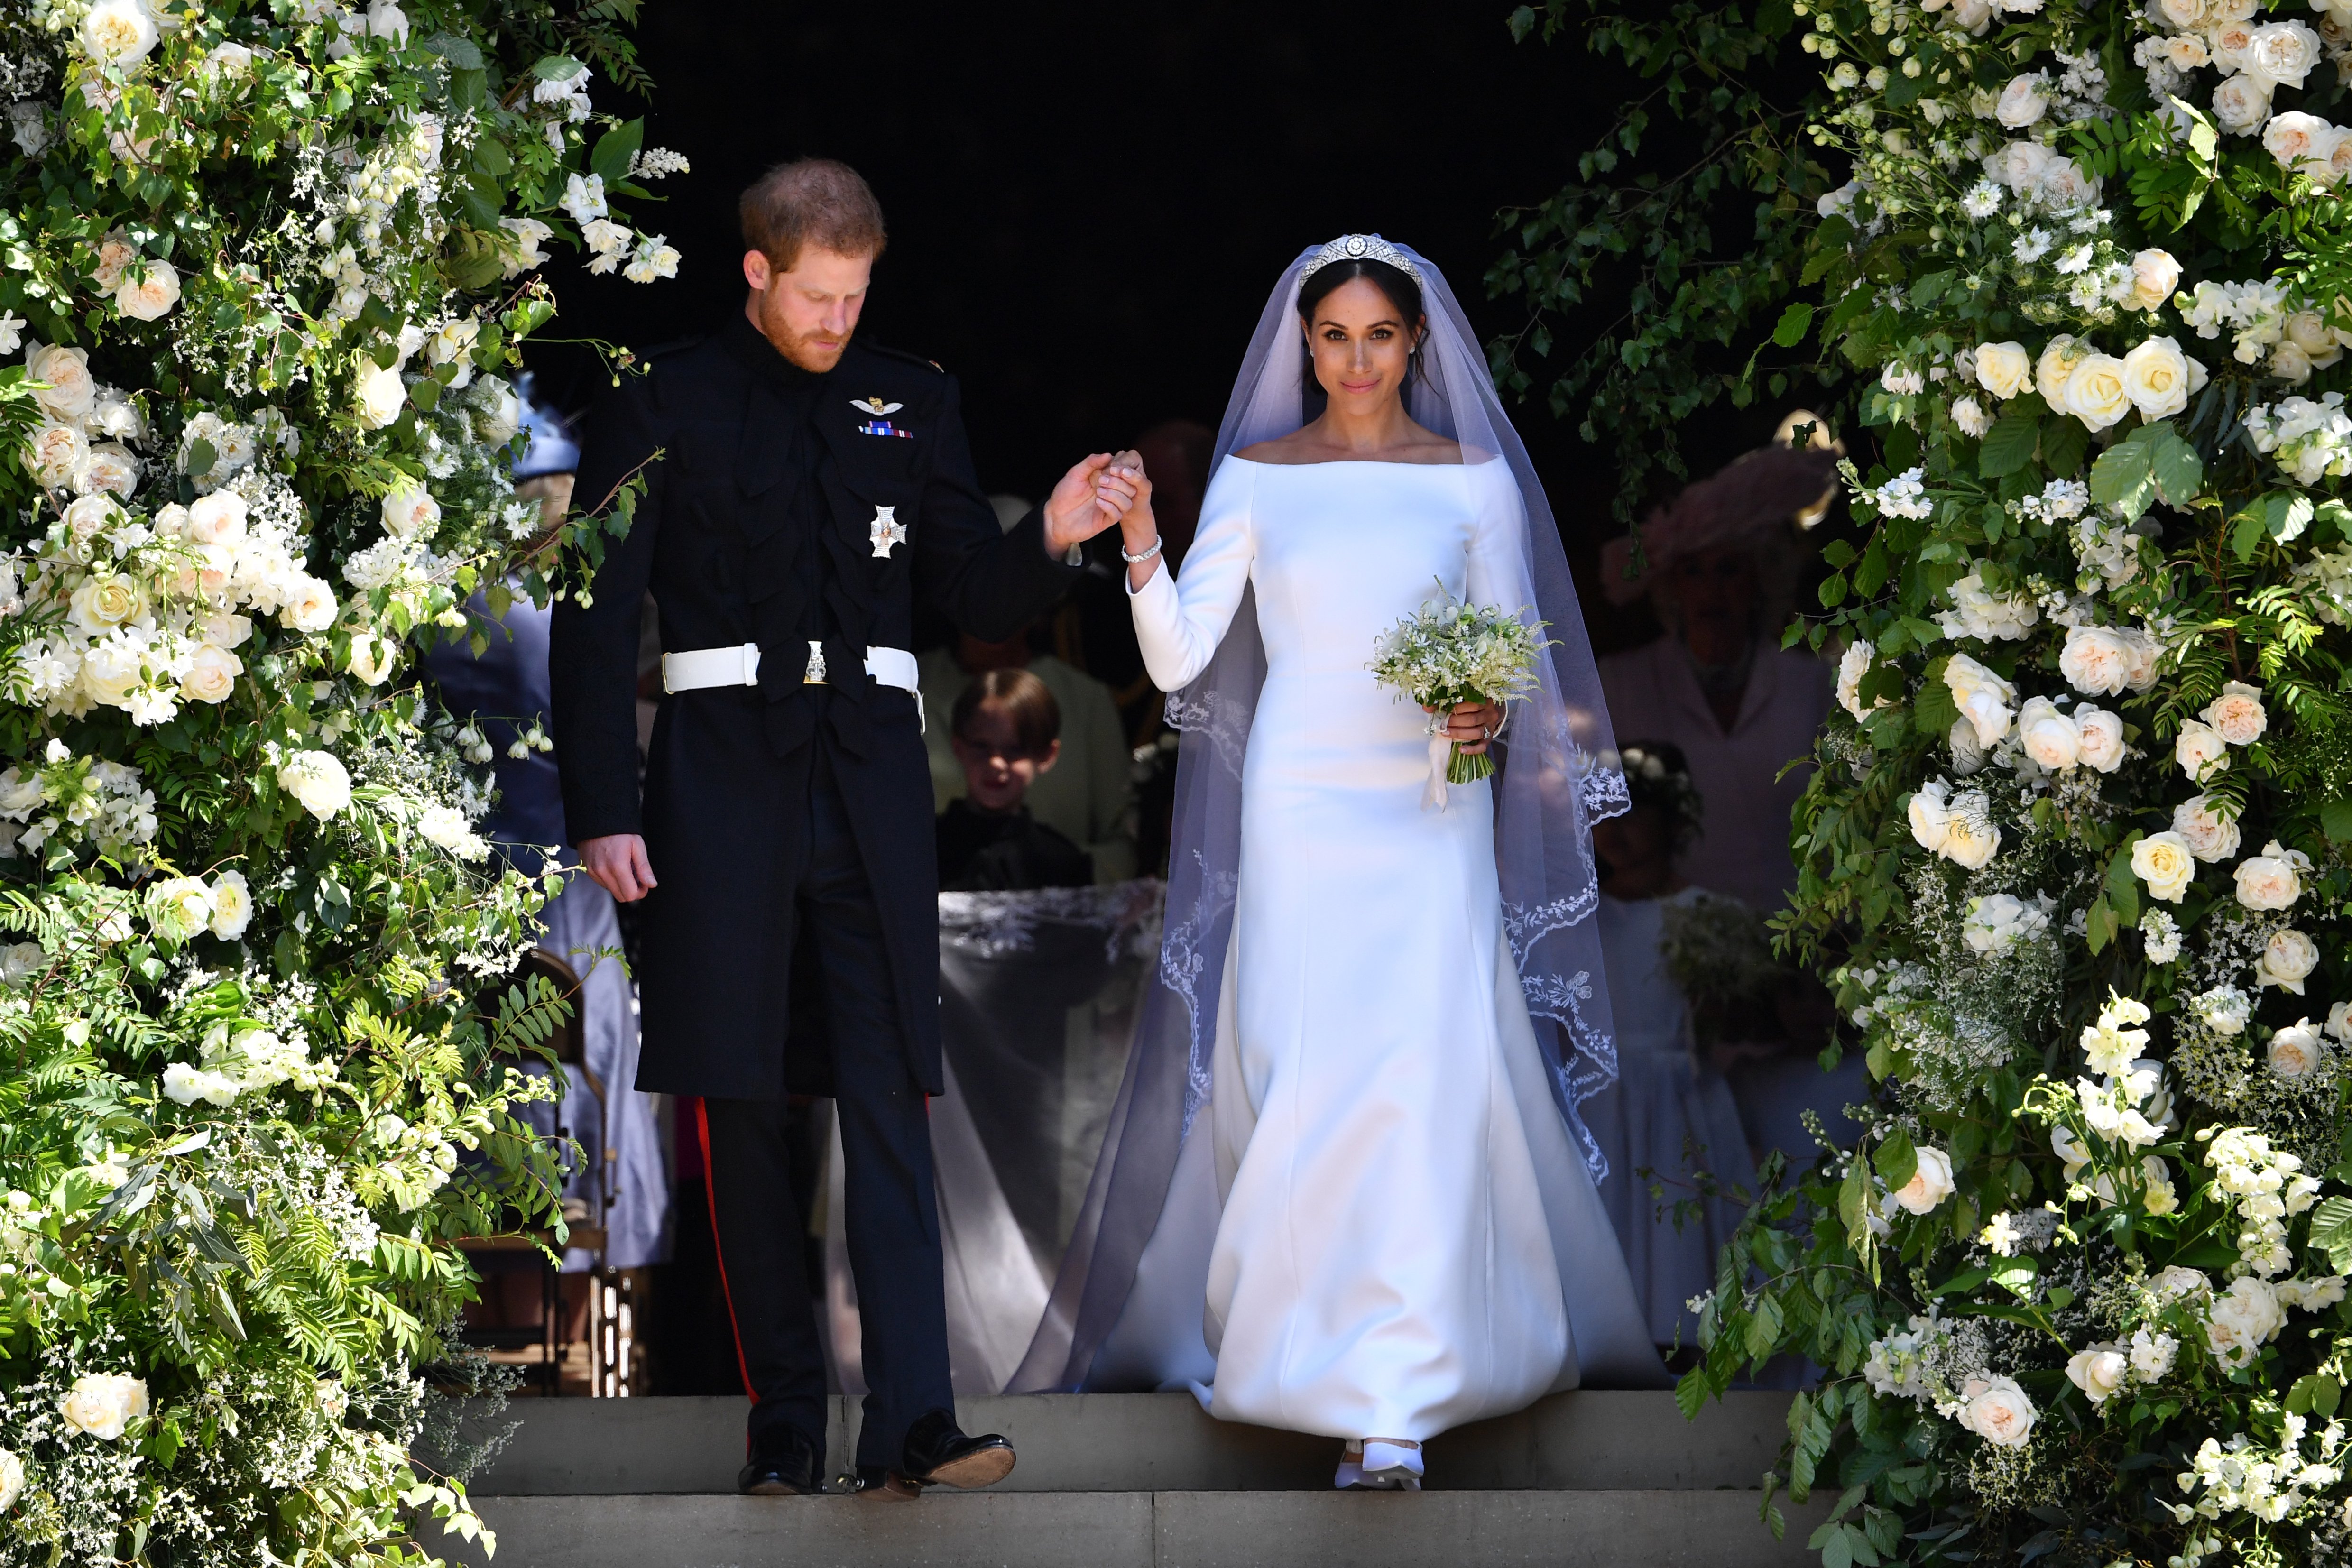 Prince Harry and Meghan Markle during their wedding in Windsor on May 19, 2018 | Source: Getty Images